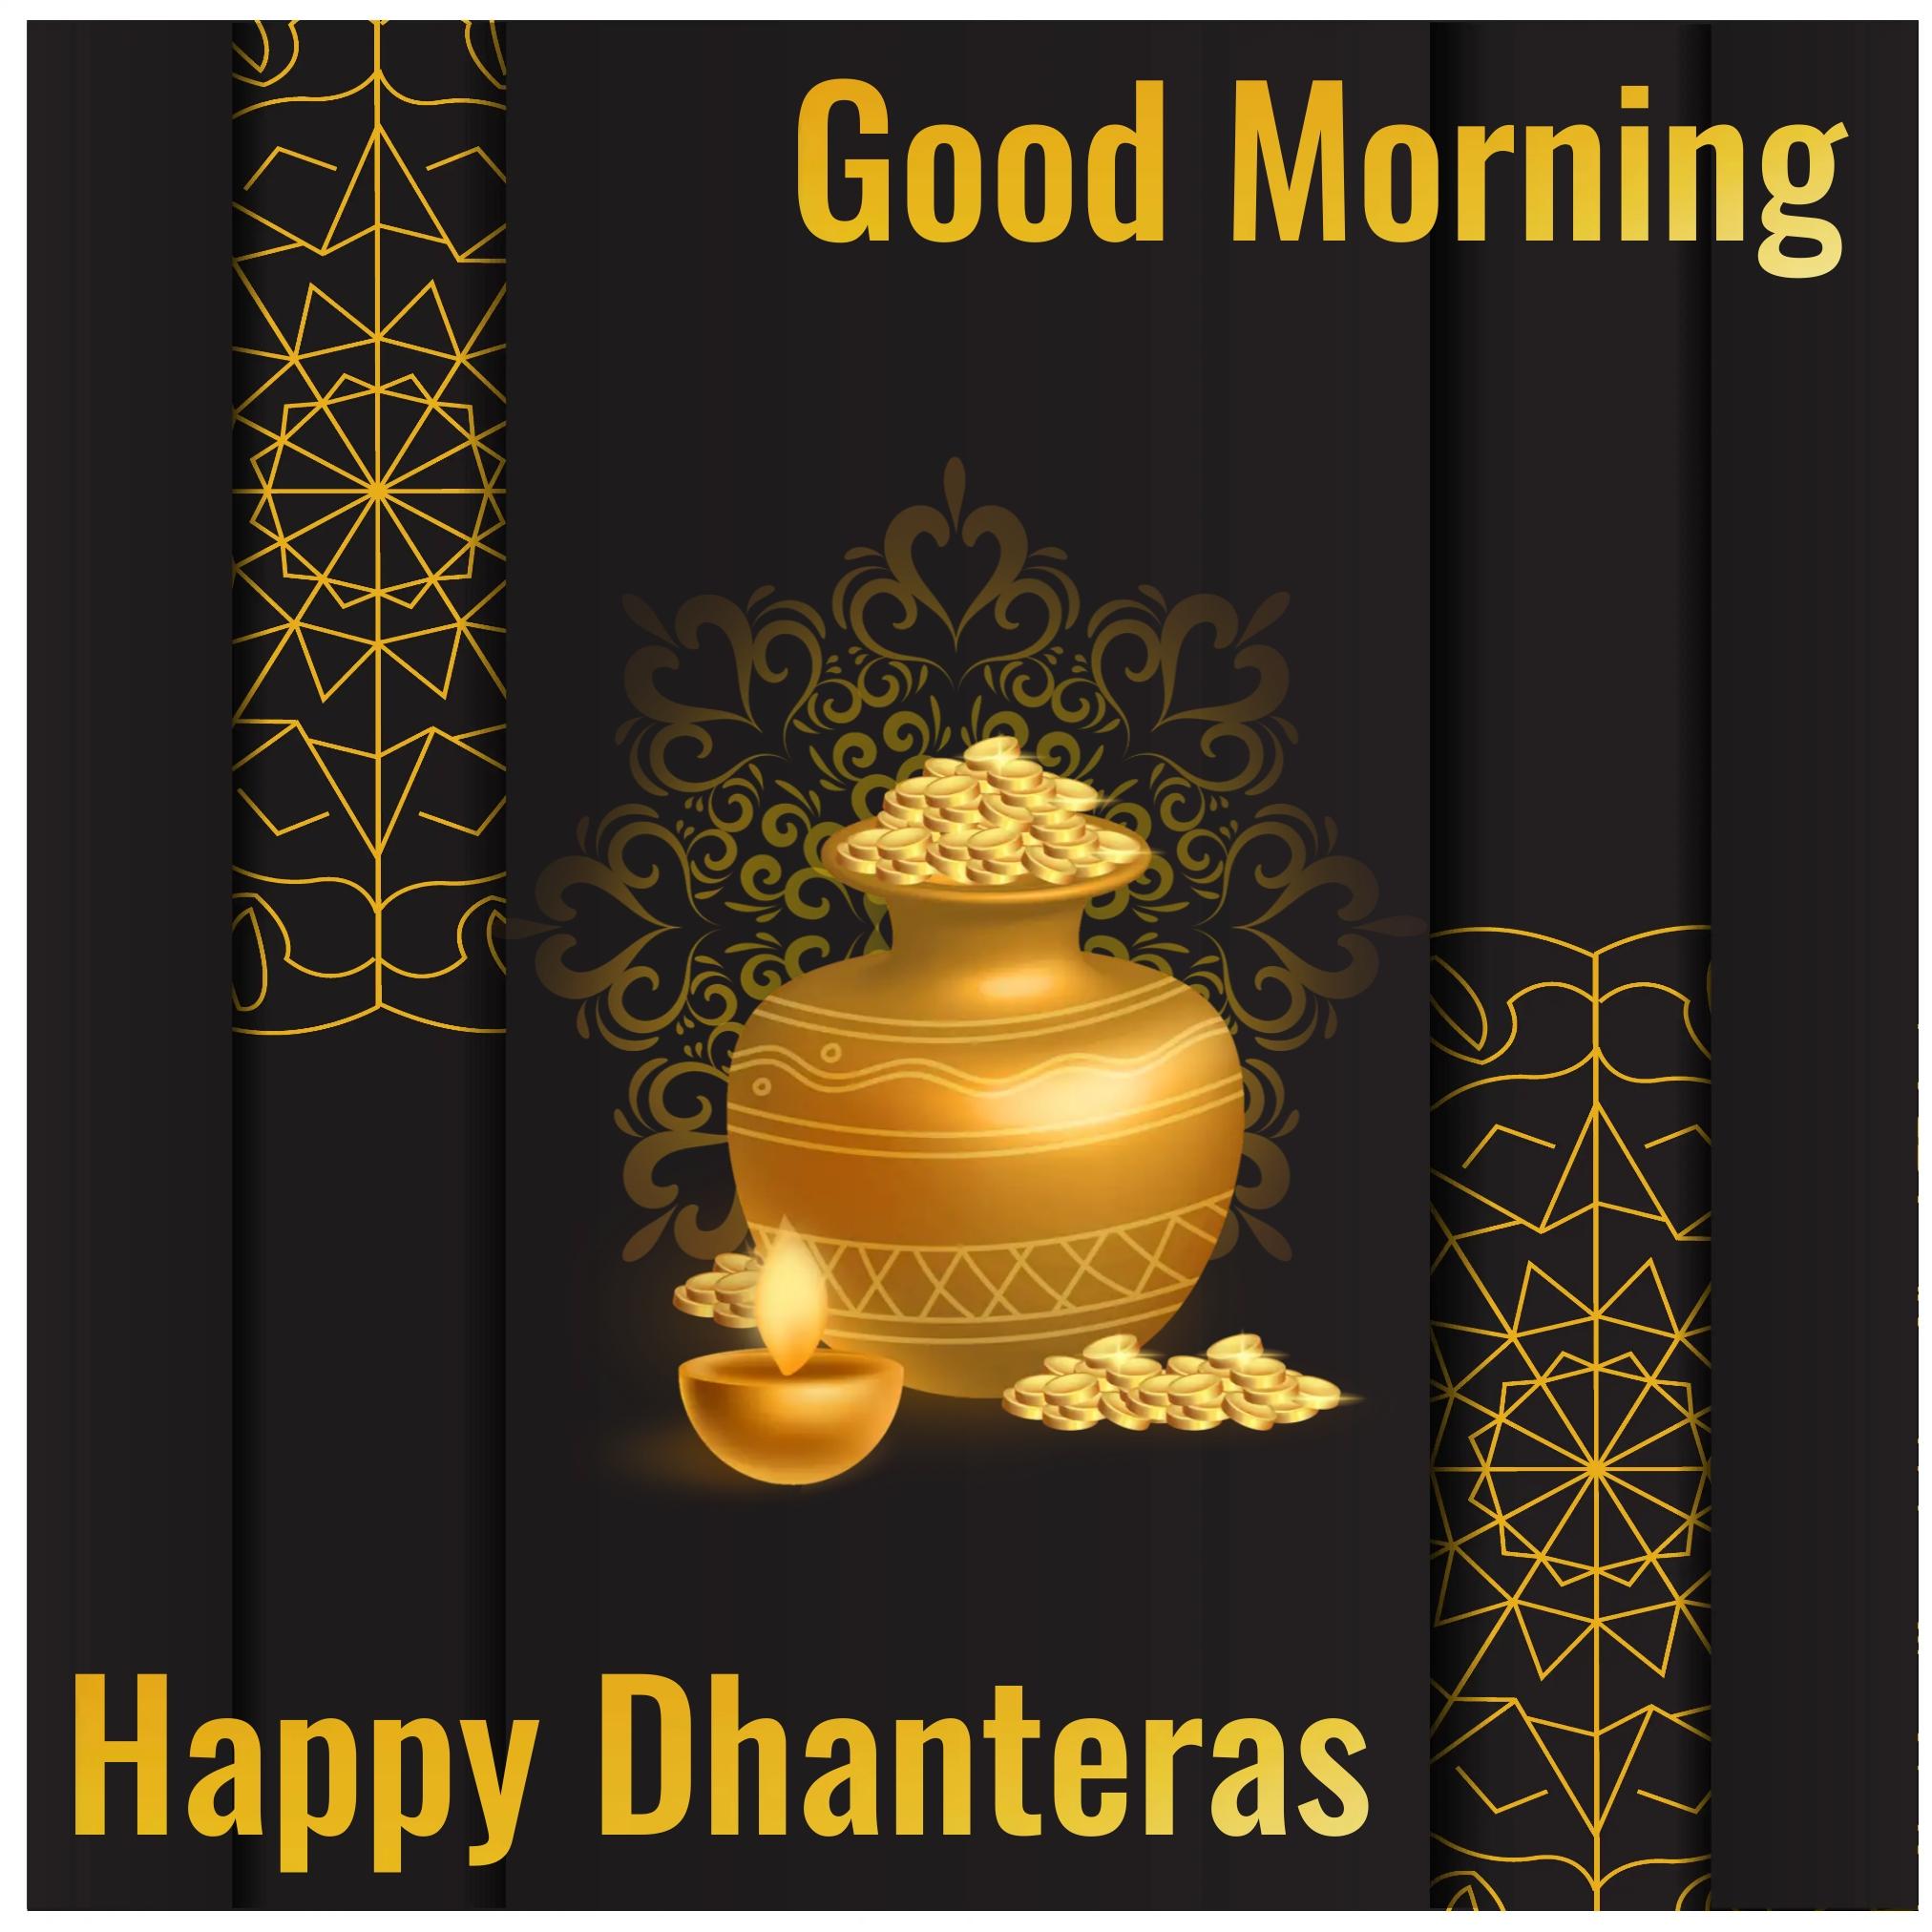 Happy Dhanteras Good Morning Images